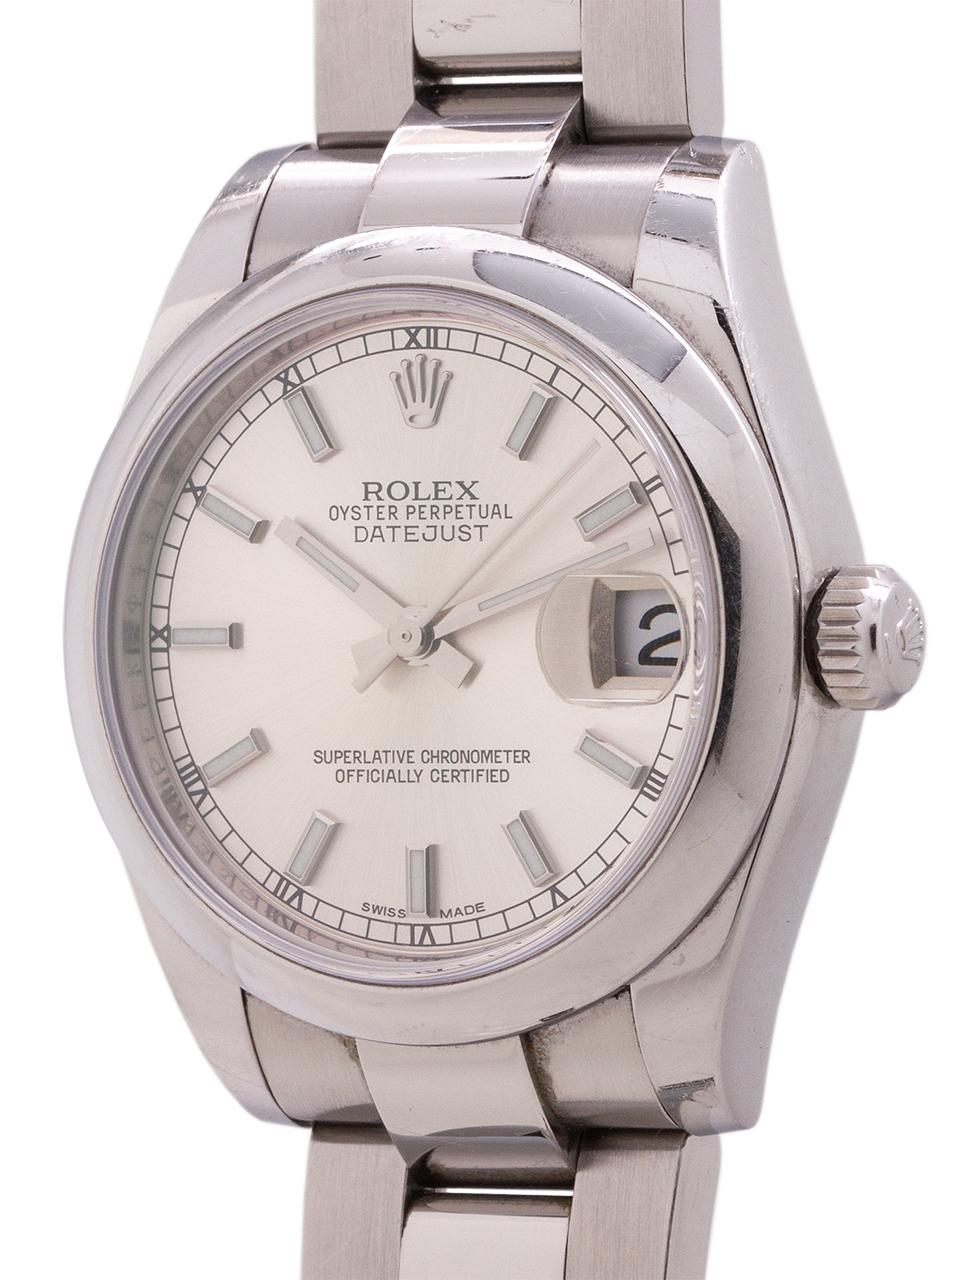 Rolex Stainless Steel Lady Rolex Datejust self winding Wristwatch 178240, c 2015 In Excellent Condition For Sale In West Hollywood, CA